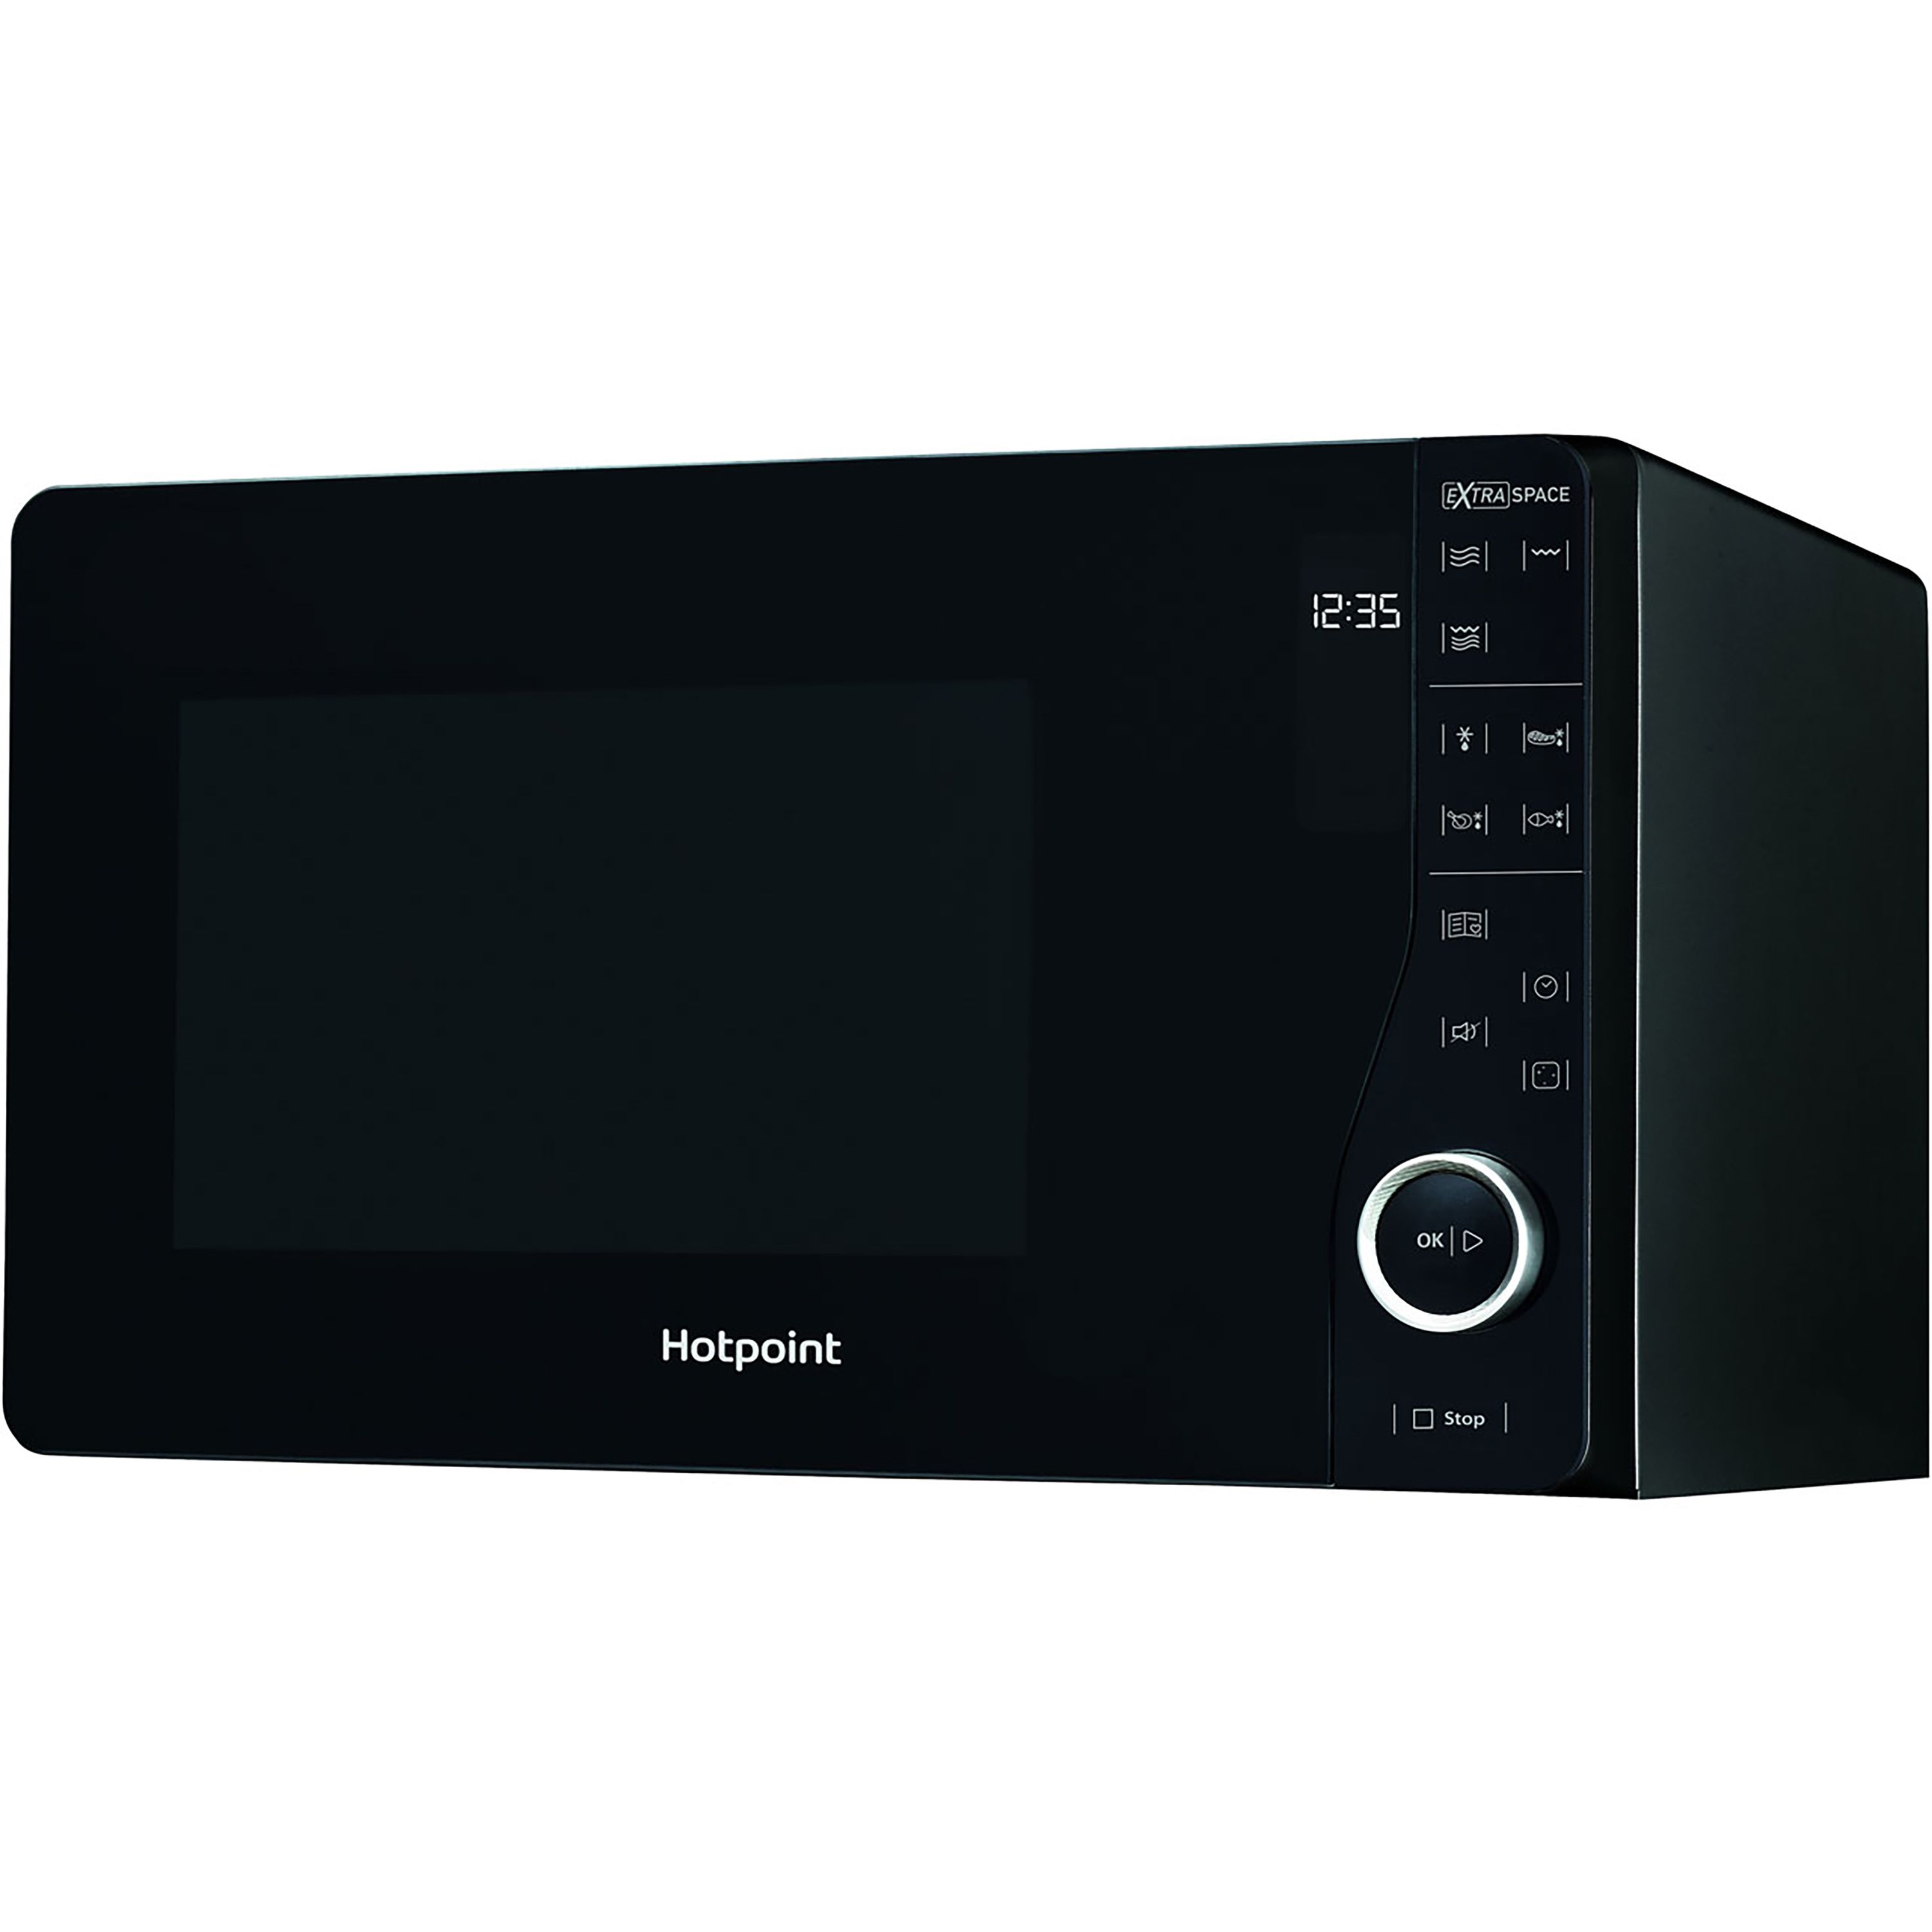 Hotpoint MWH2622MB_BK Freestanding Microwave with grill - Black